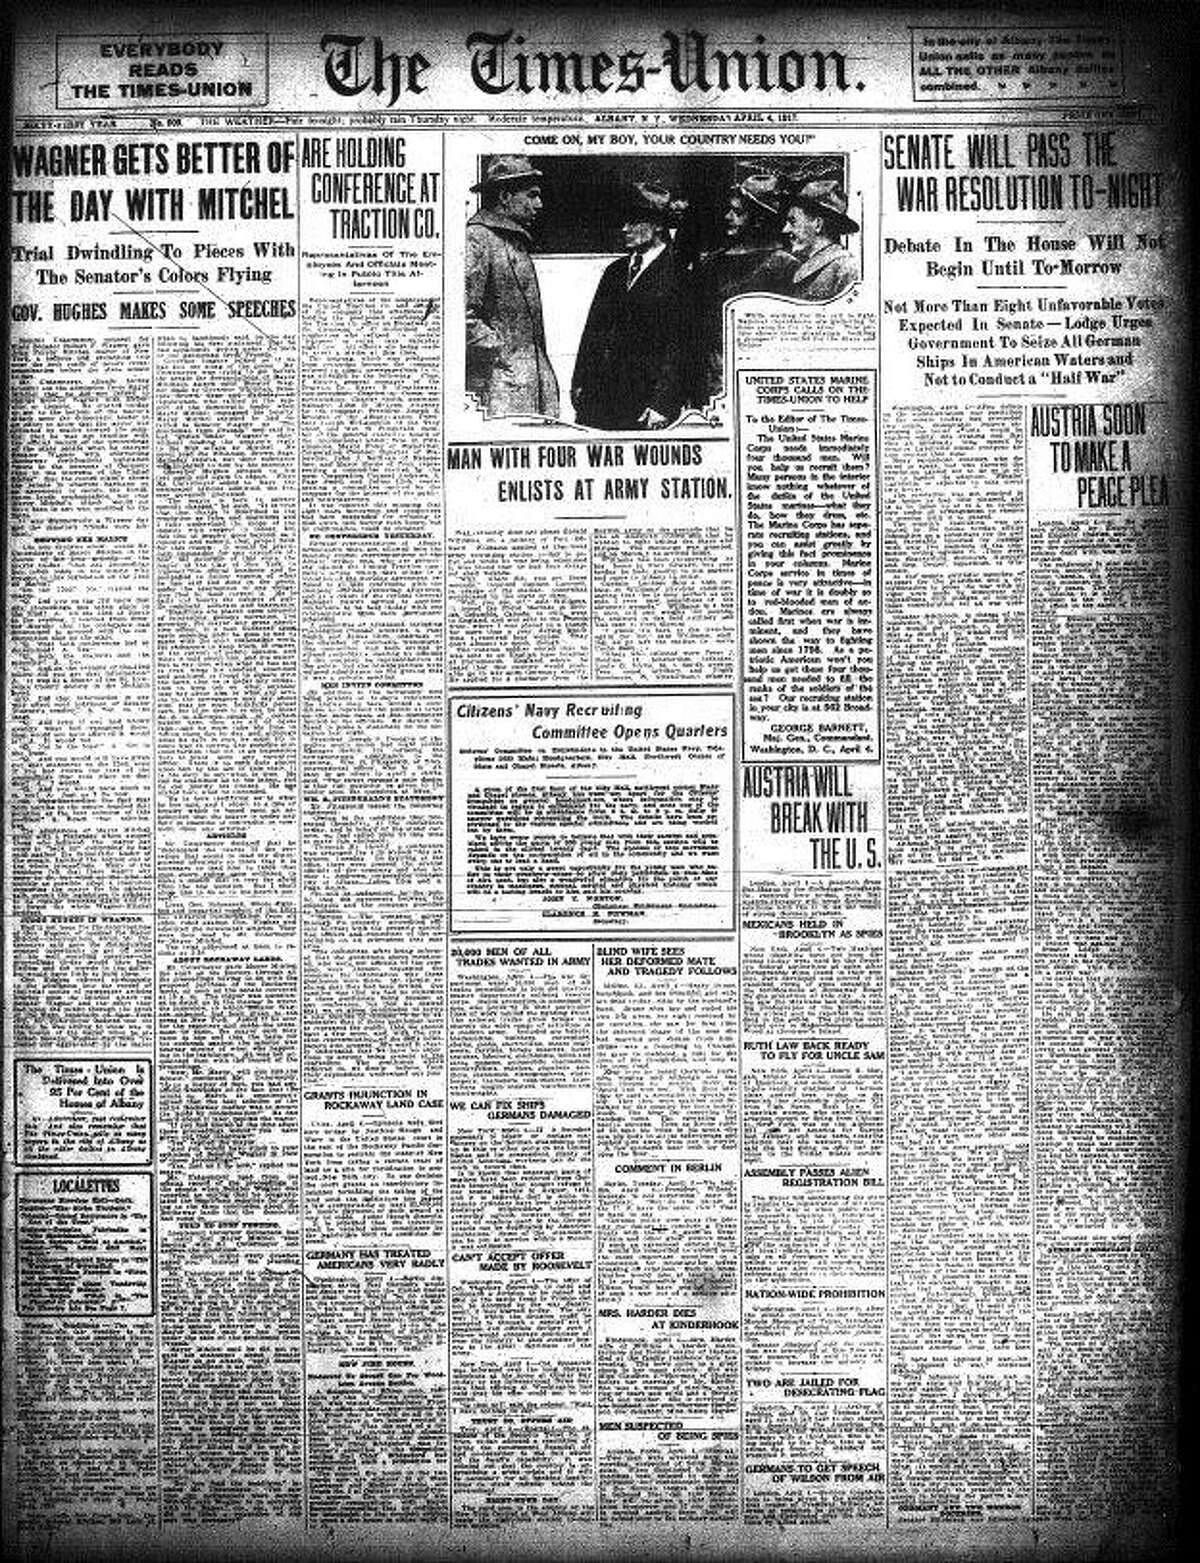 Times Union front page April 4, 1917, as America entered World War I.